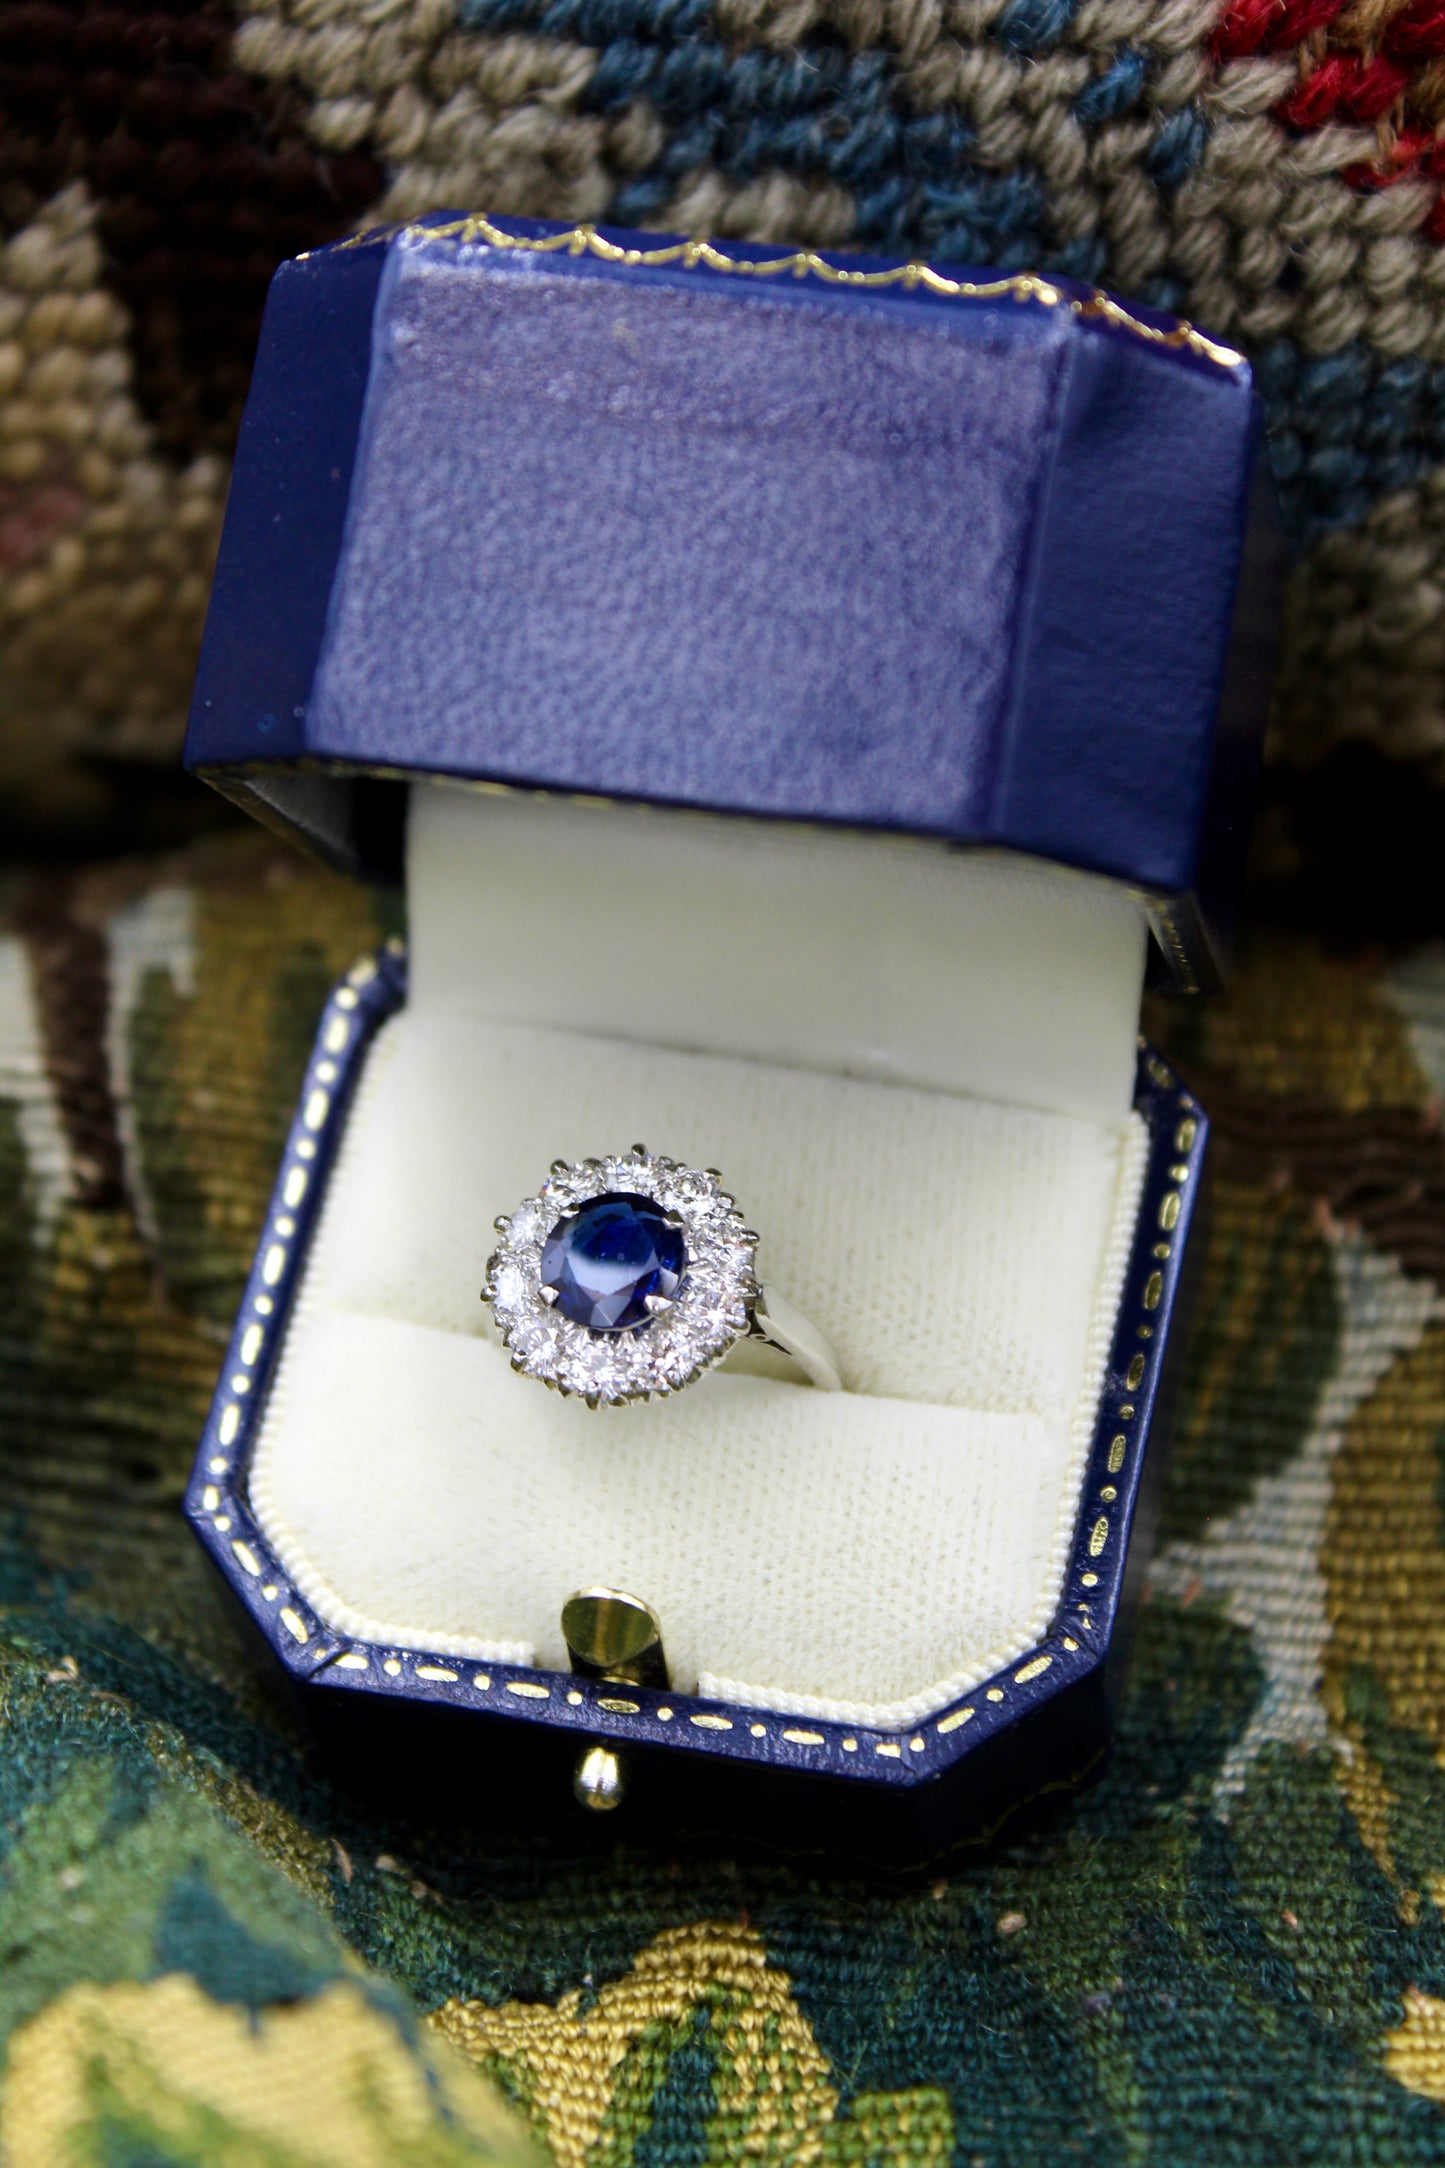 A fine Round Sapphire and Diamond Cluster Ring mounted in Platinum (tested). Mid 20th Century.